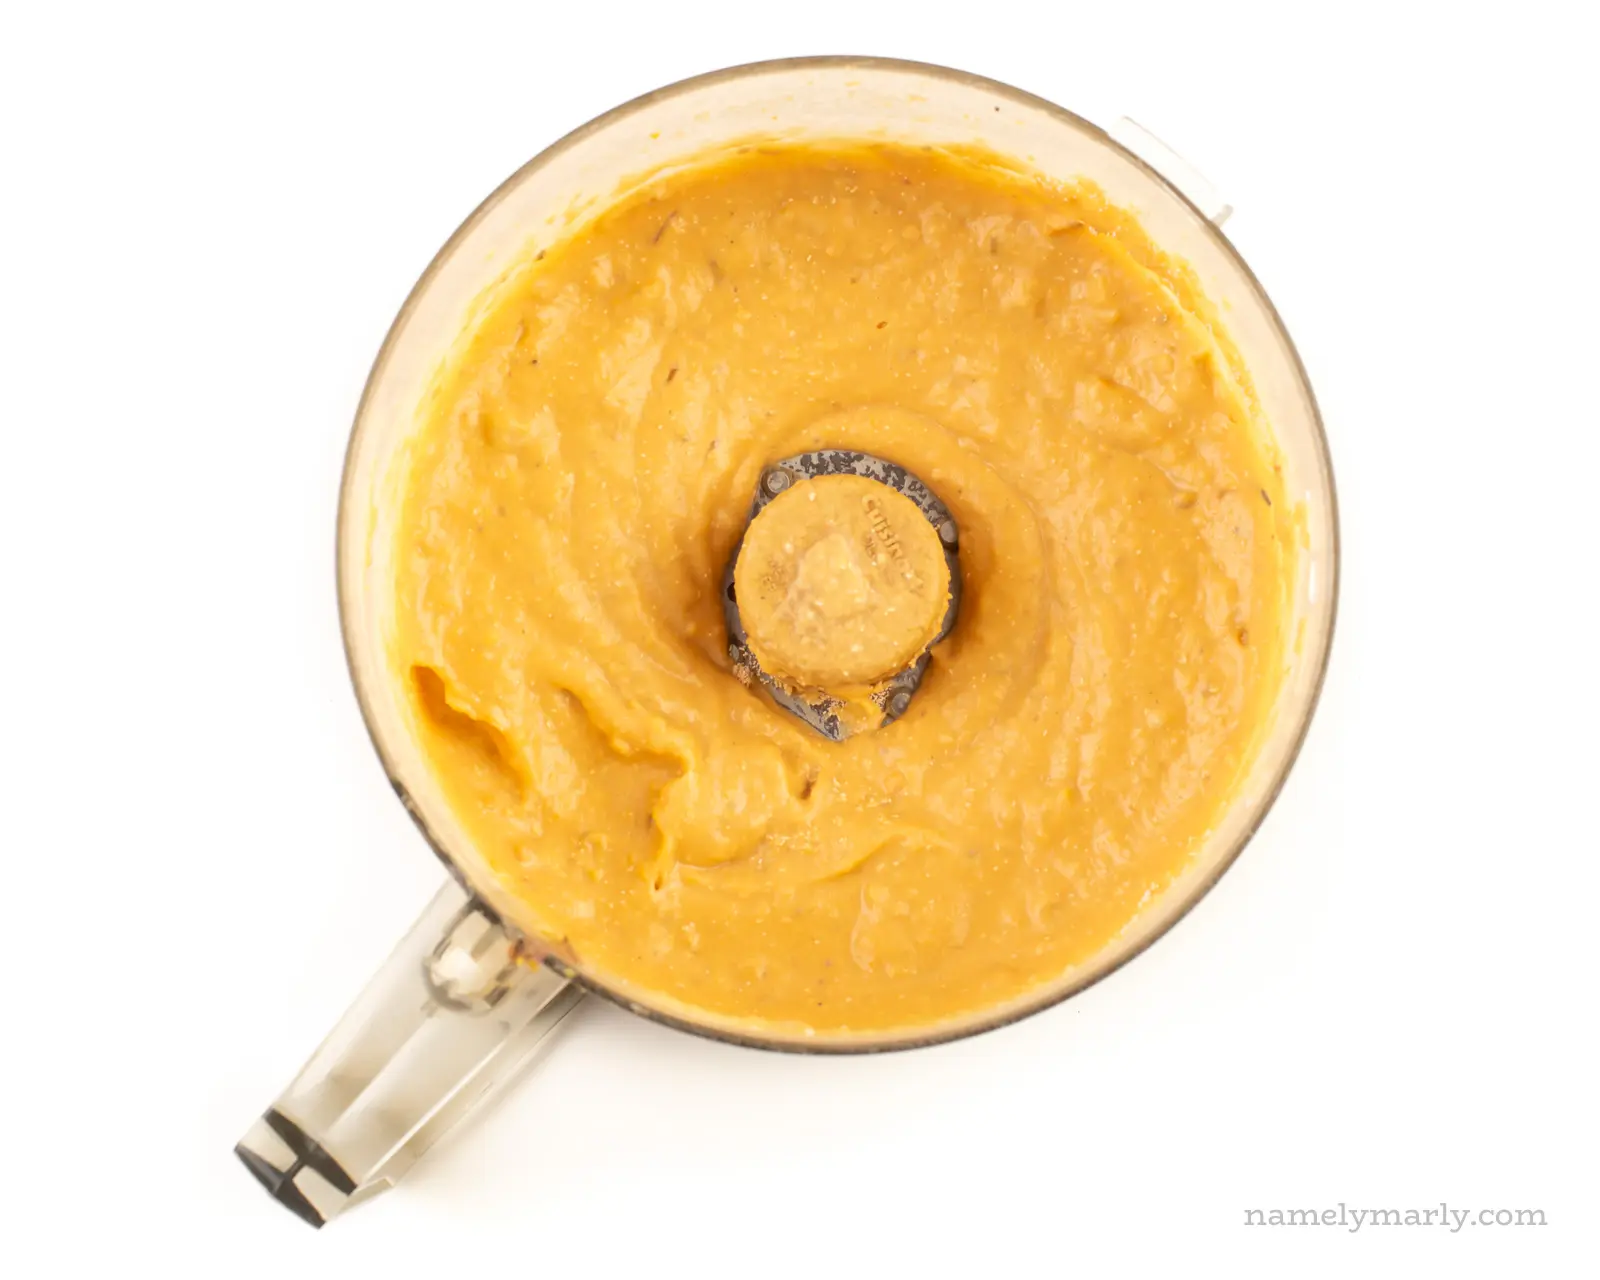 A sweet potato mixture has been mashed in the bottom of a food processor bowl.